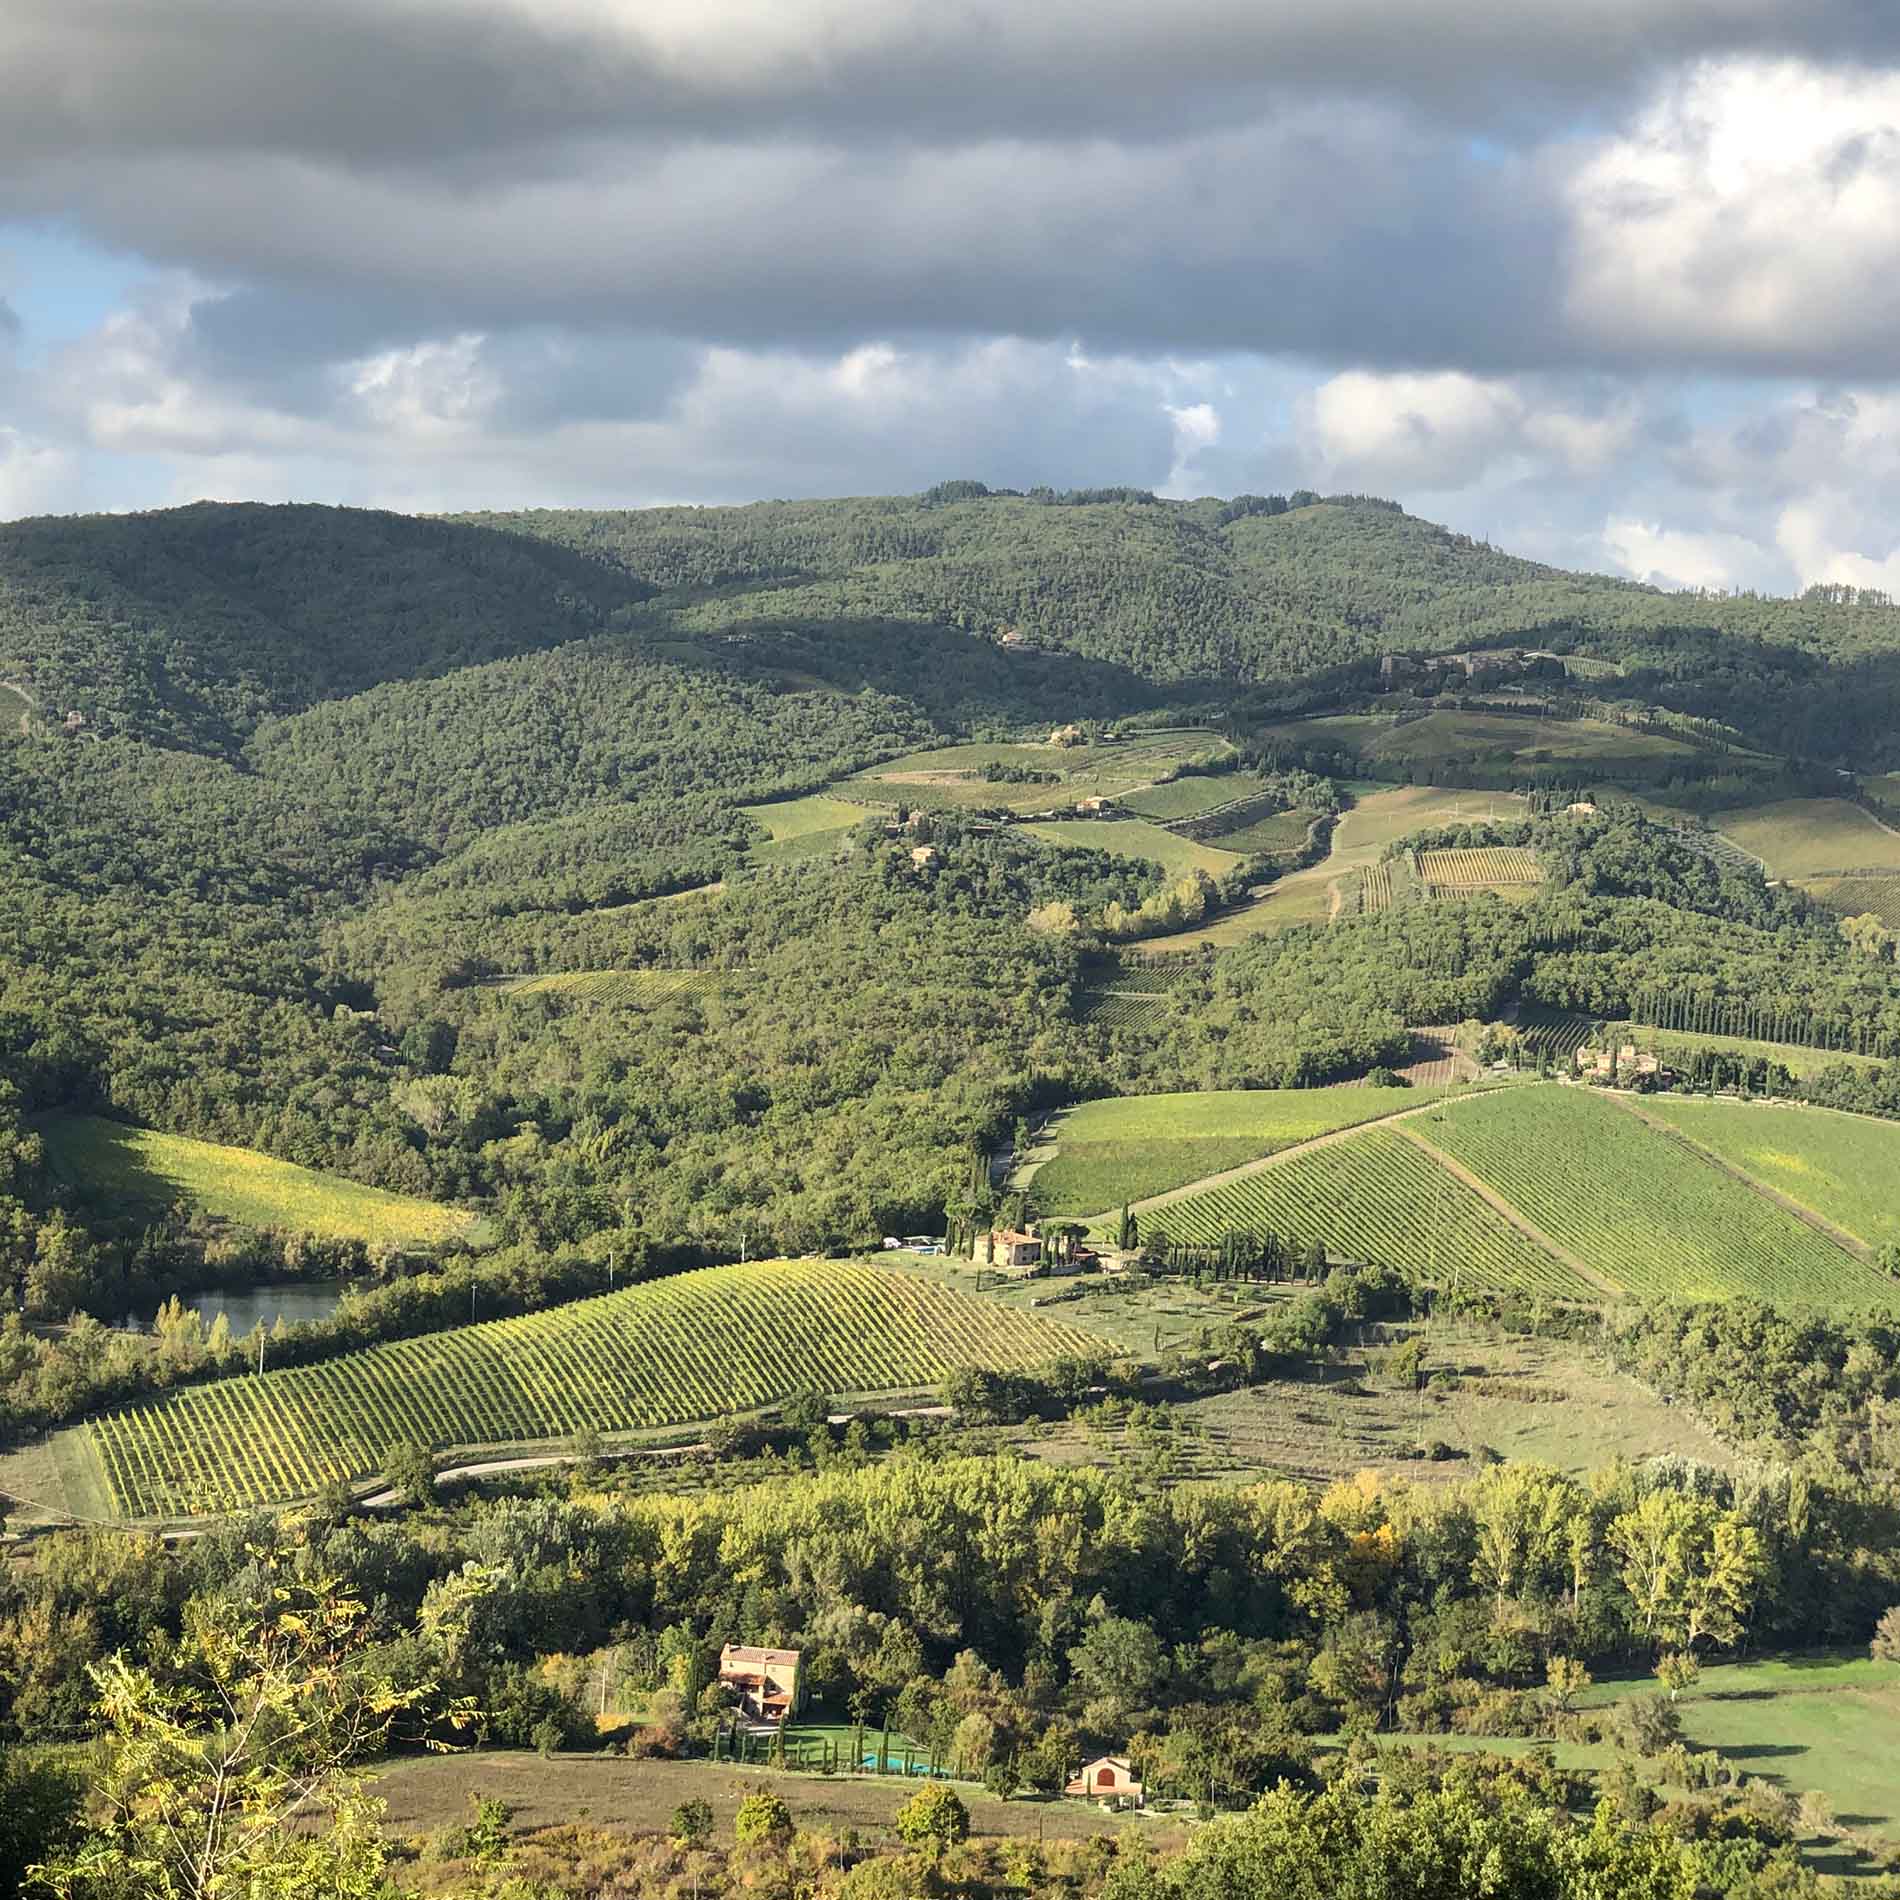 A sunny view of a green valley covered in vineyards and trees, with tree-covered hills rising in the background, with clouds in the sky overhead.